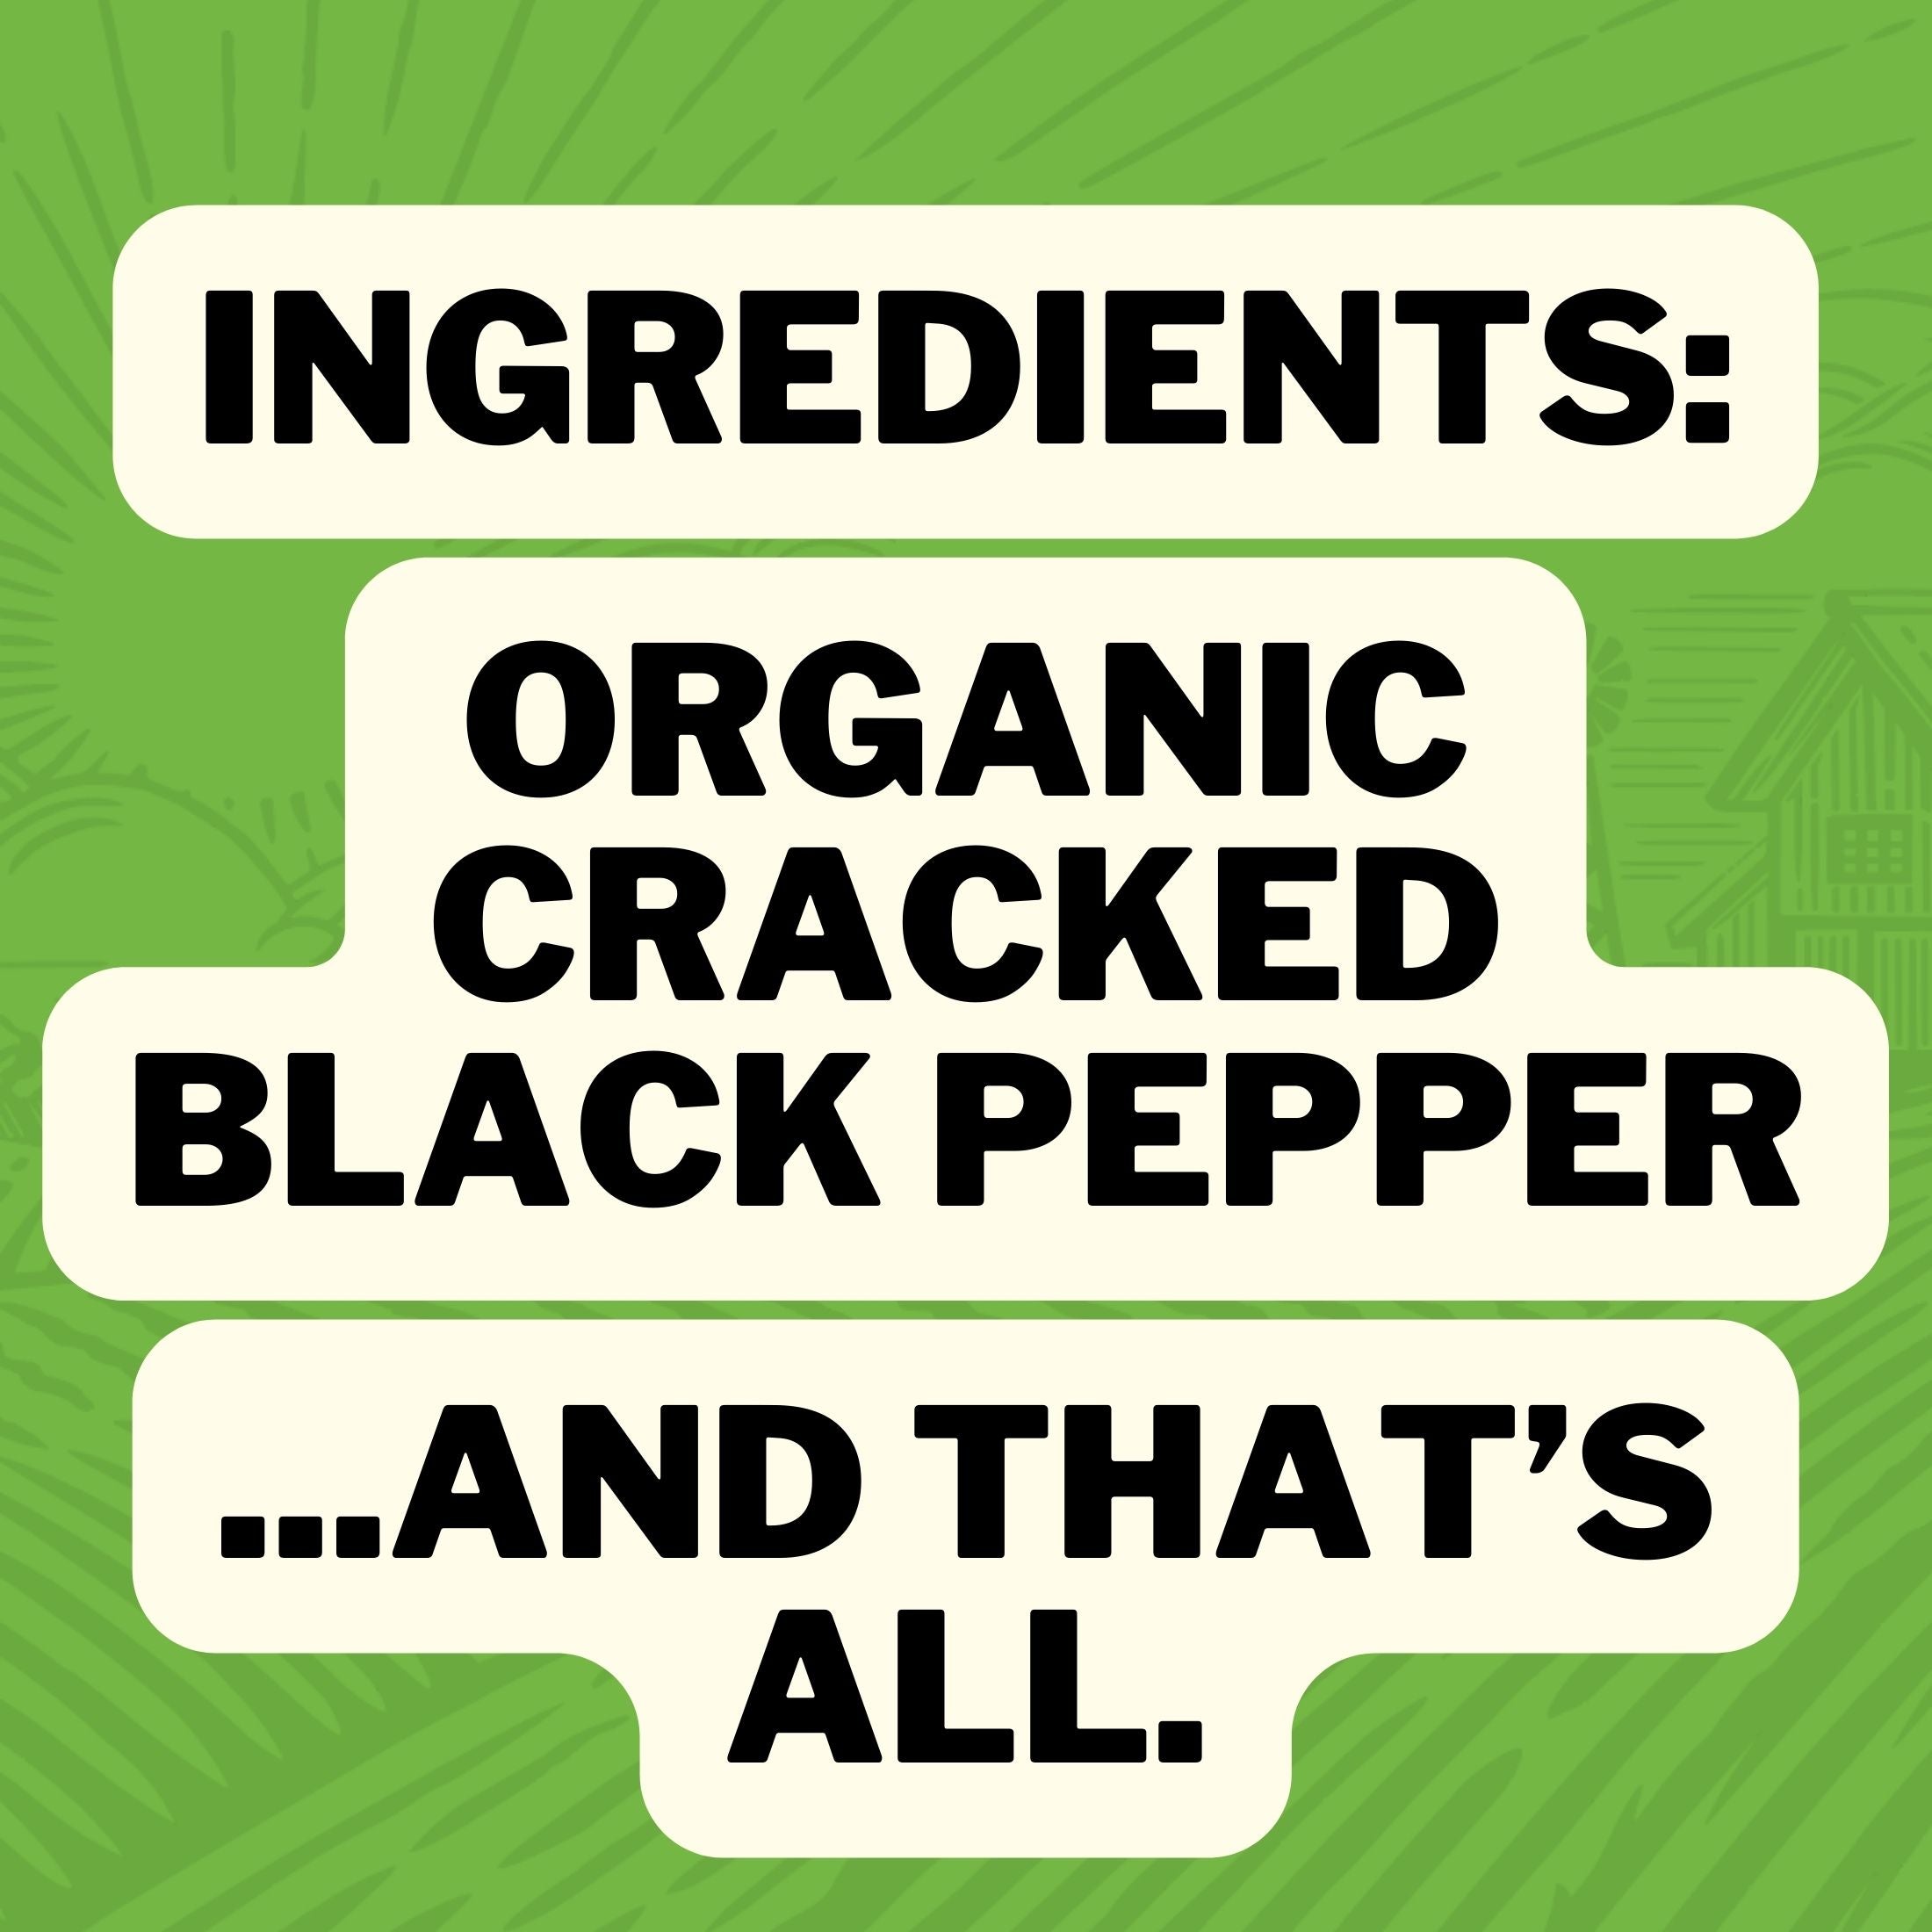 Ingredients: Organic Cracked Black Pepper ... And That's All.